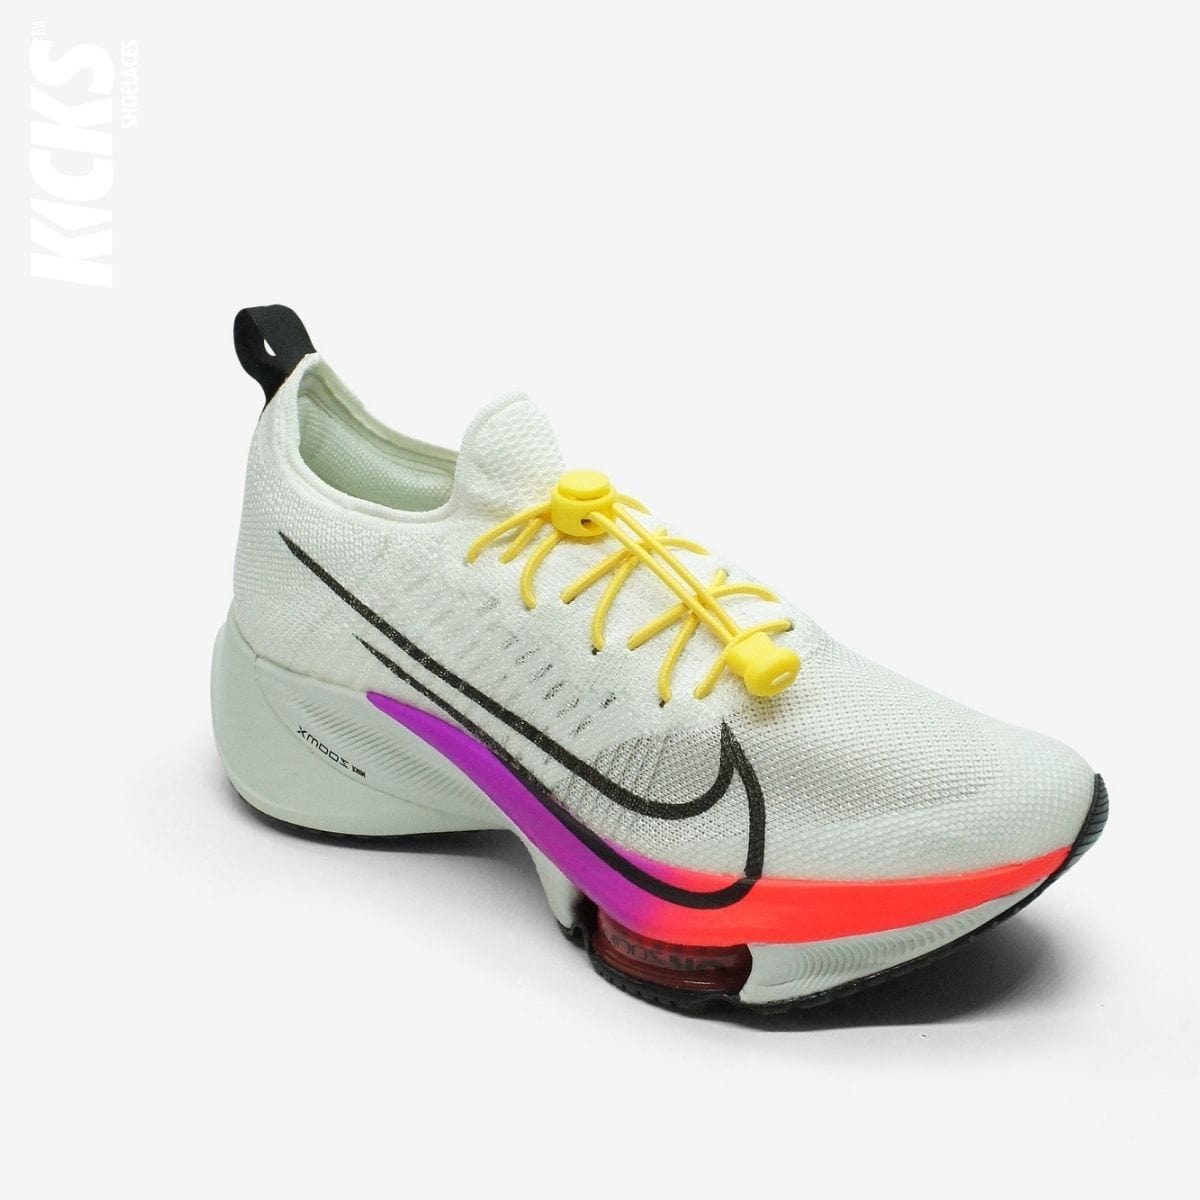 quick-laces-with-yellow-elastic-no-tie-shoelaces-on-nike-running-shoe-by-kicks-shoelaces